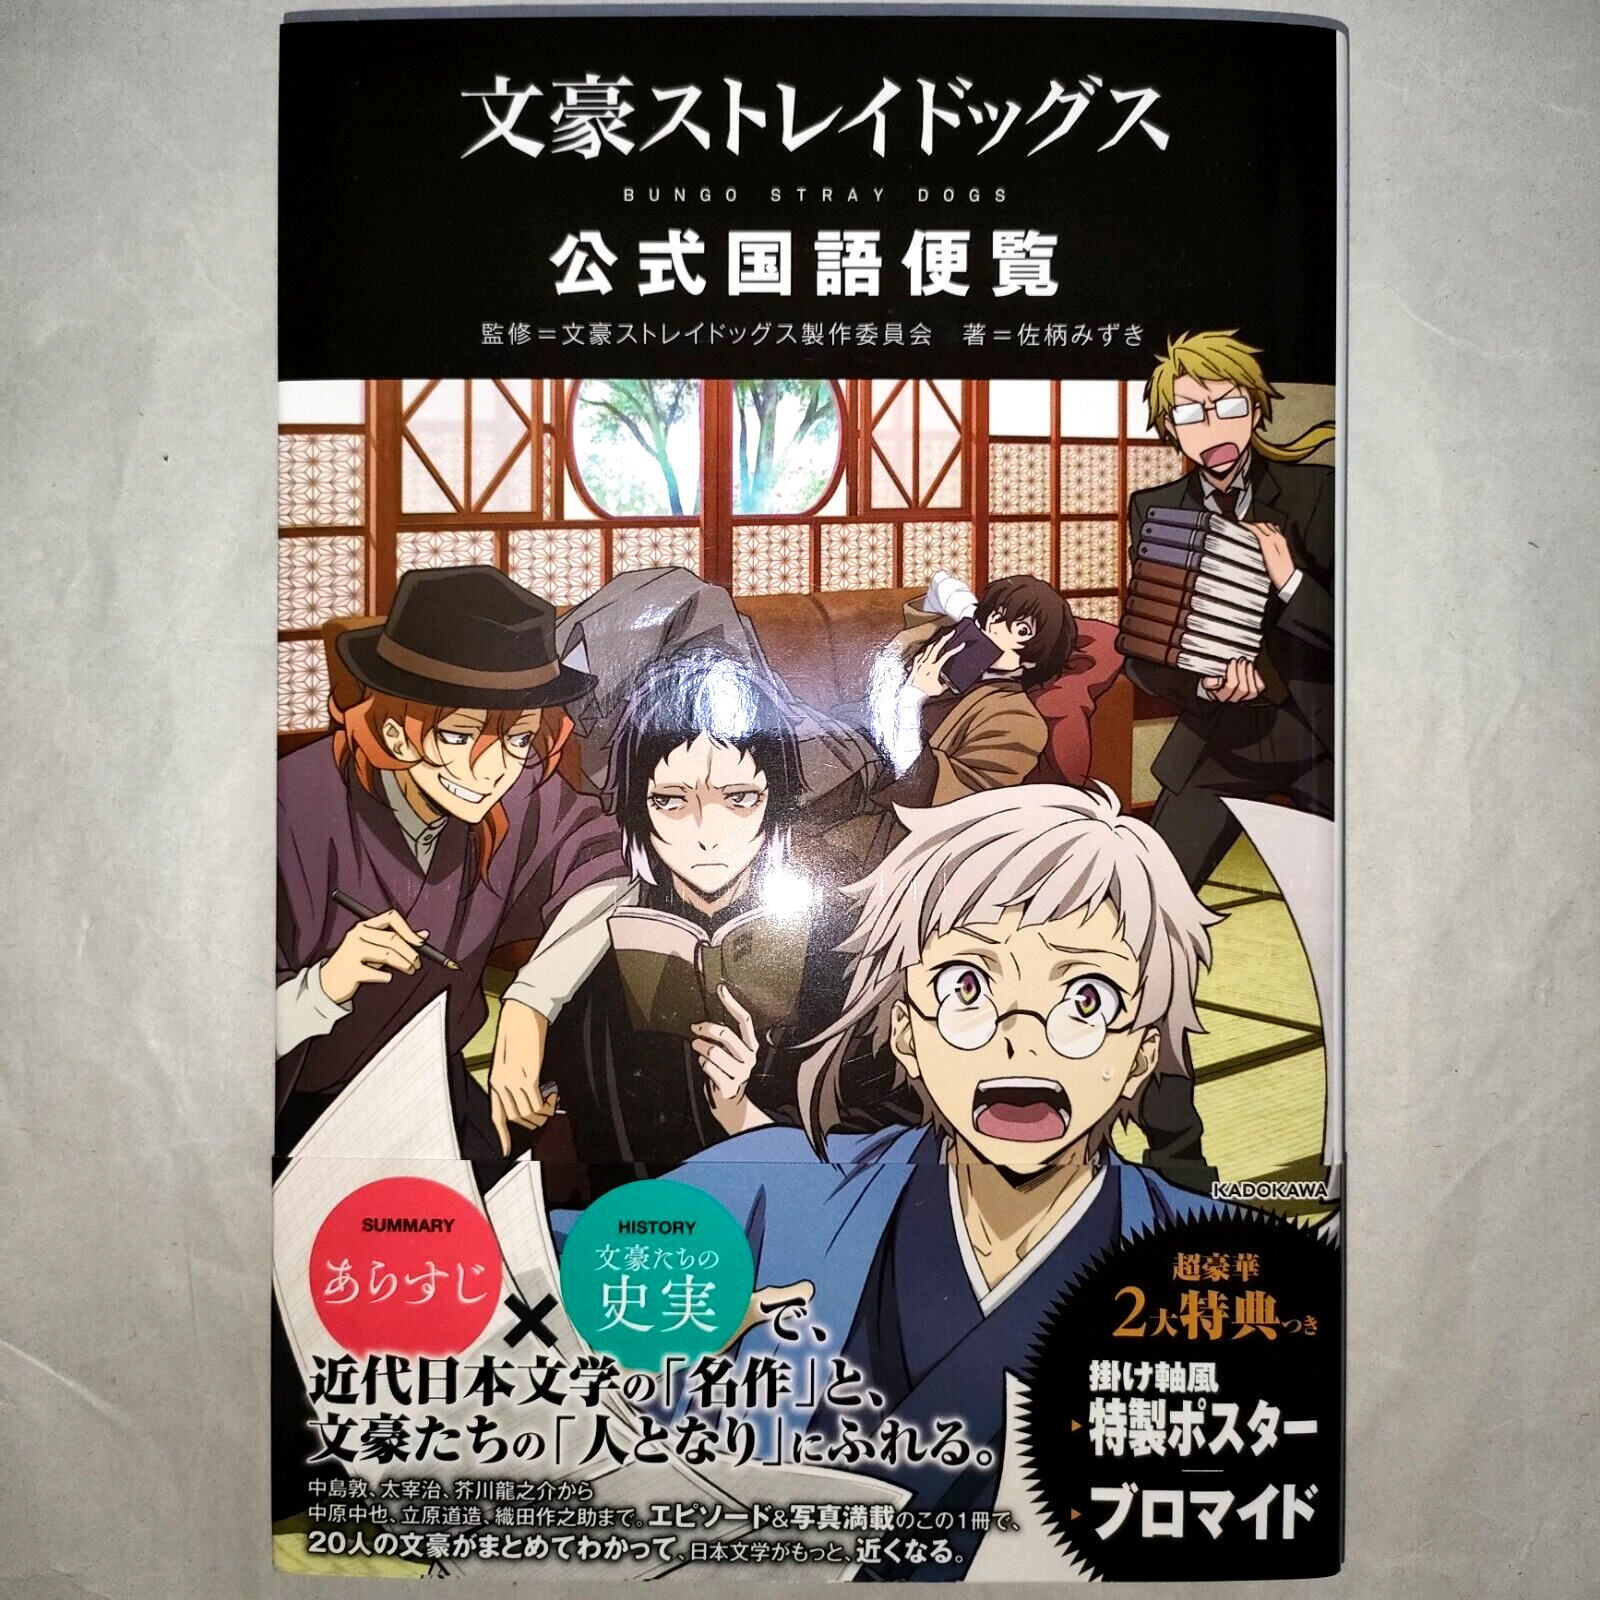 Bungo Stray Dogs Official Character Book With Bromide (sealed) & Poster Japanese